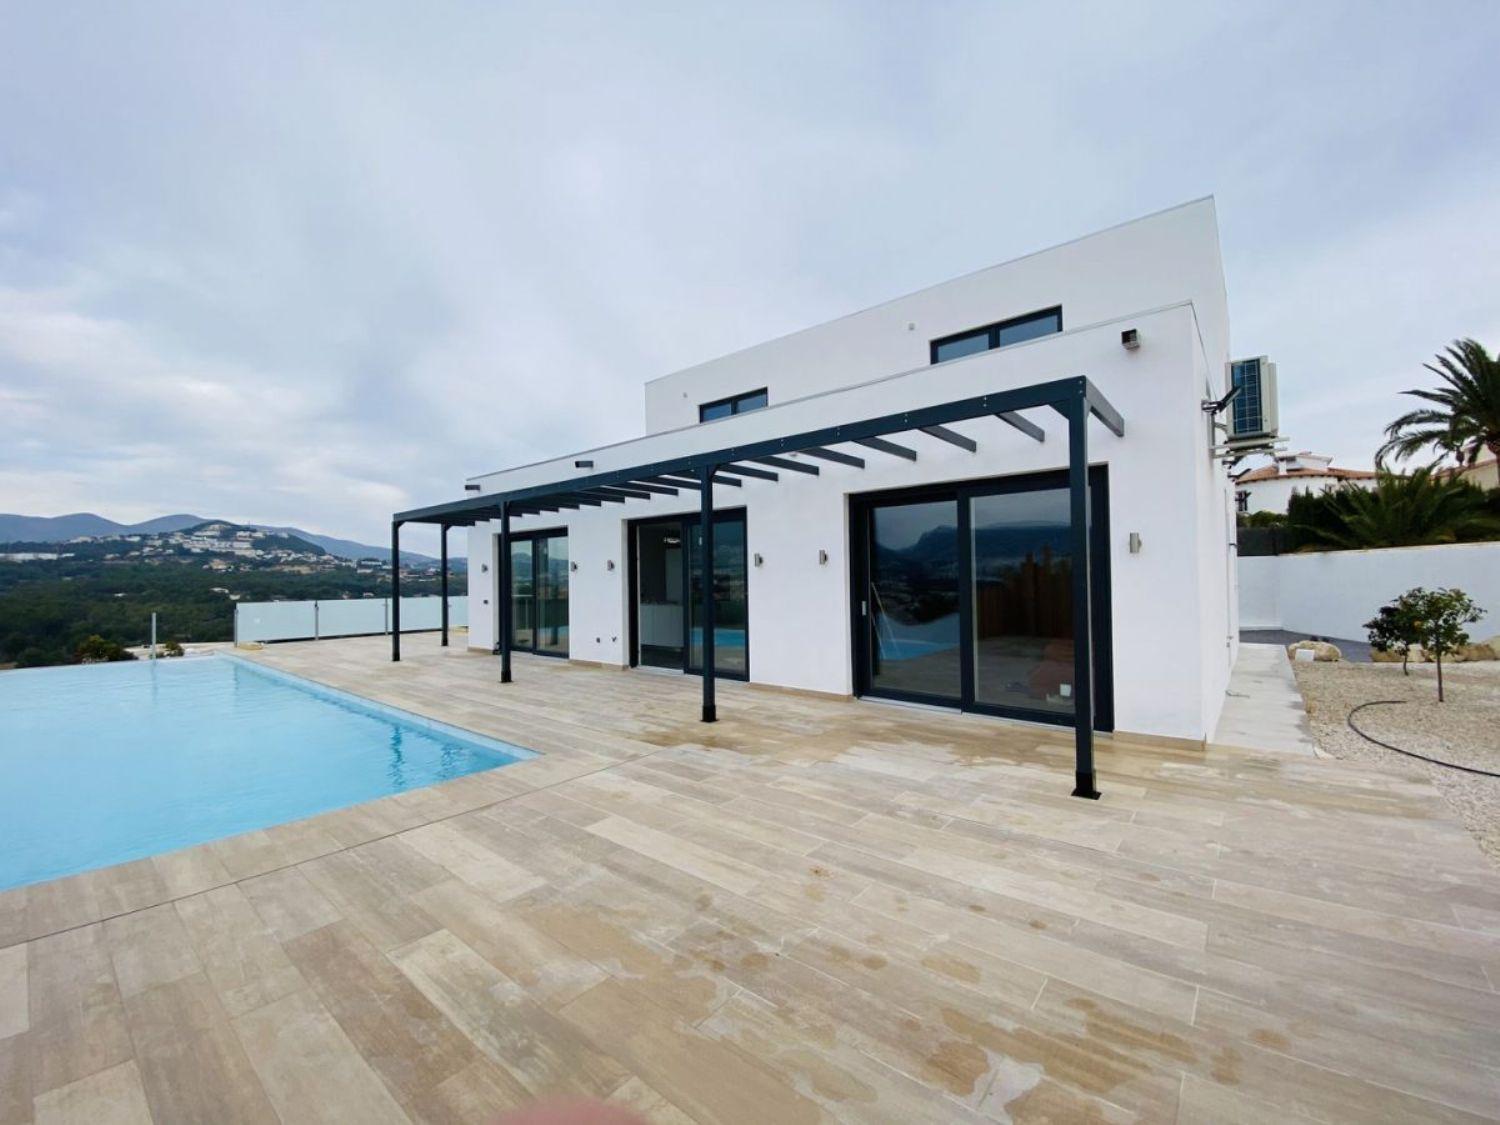 For sale a beautiful bioclimatic villa newly built.